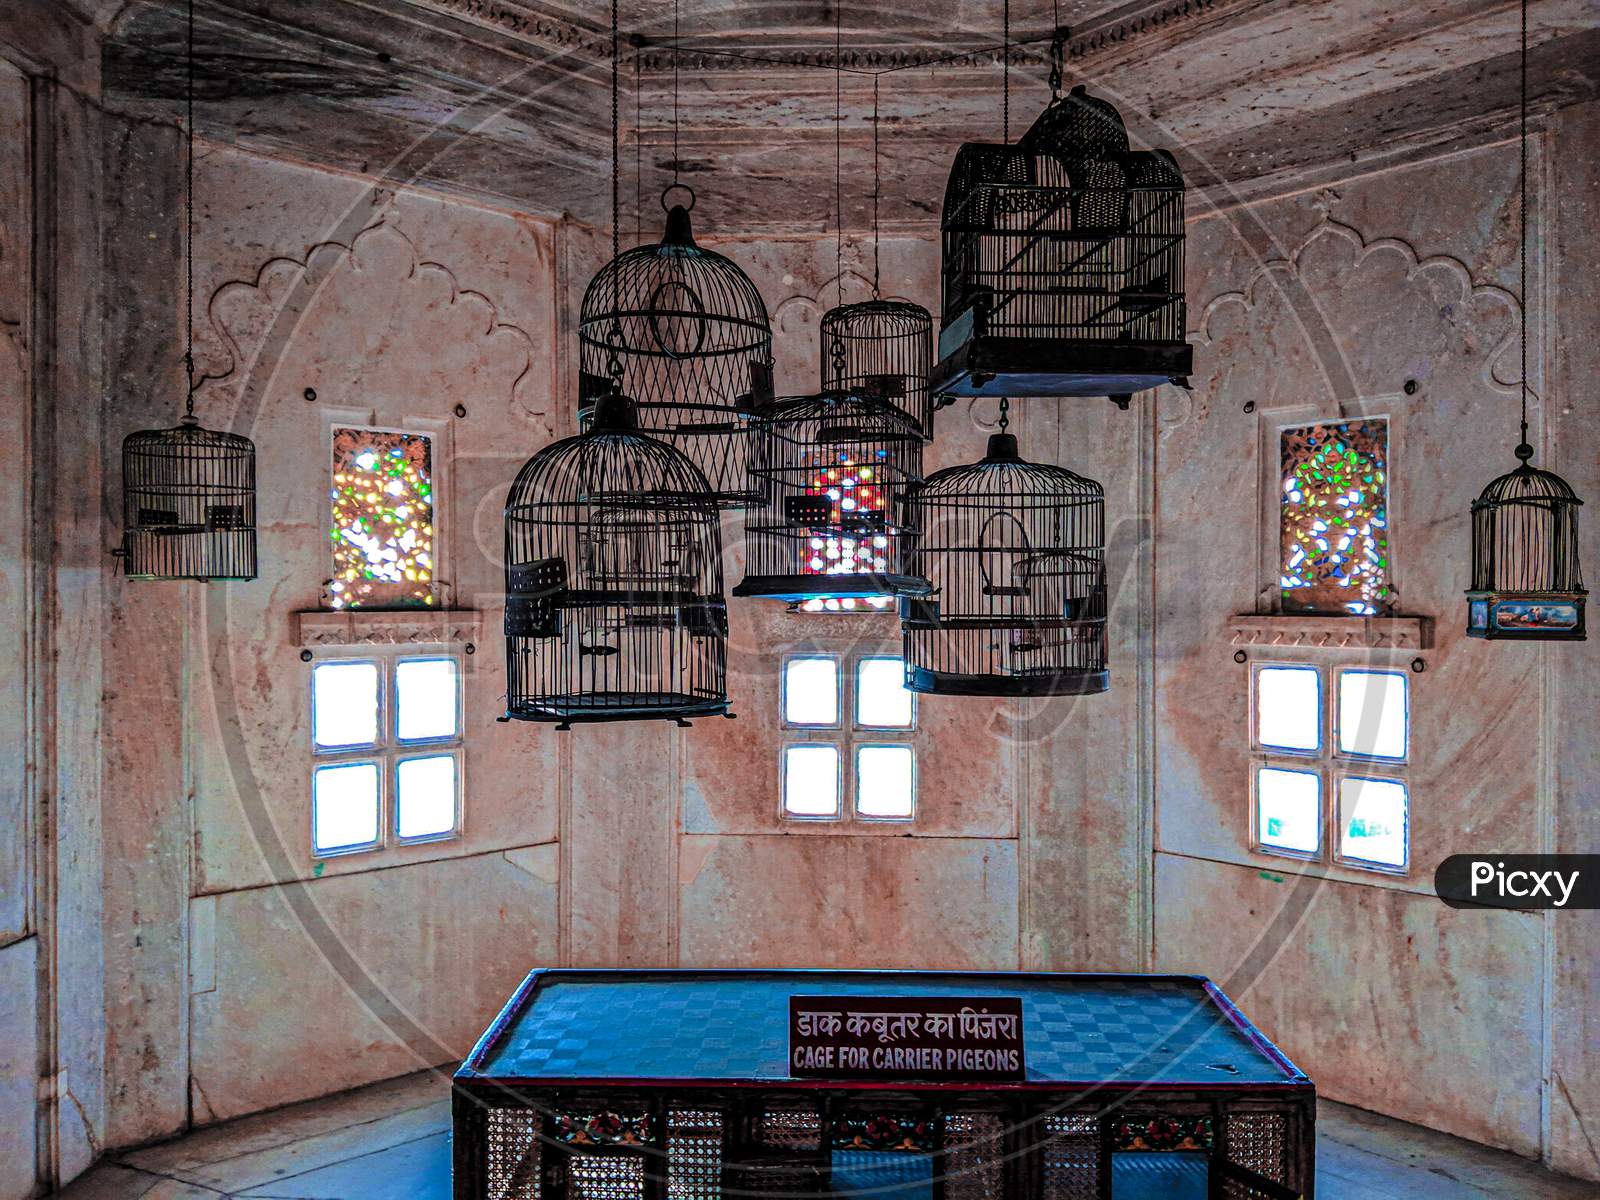 Cage for Carrier Pigeons | City Palace | Mobile Photography